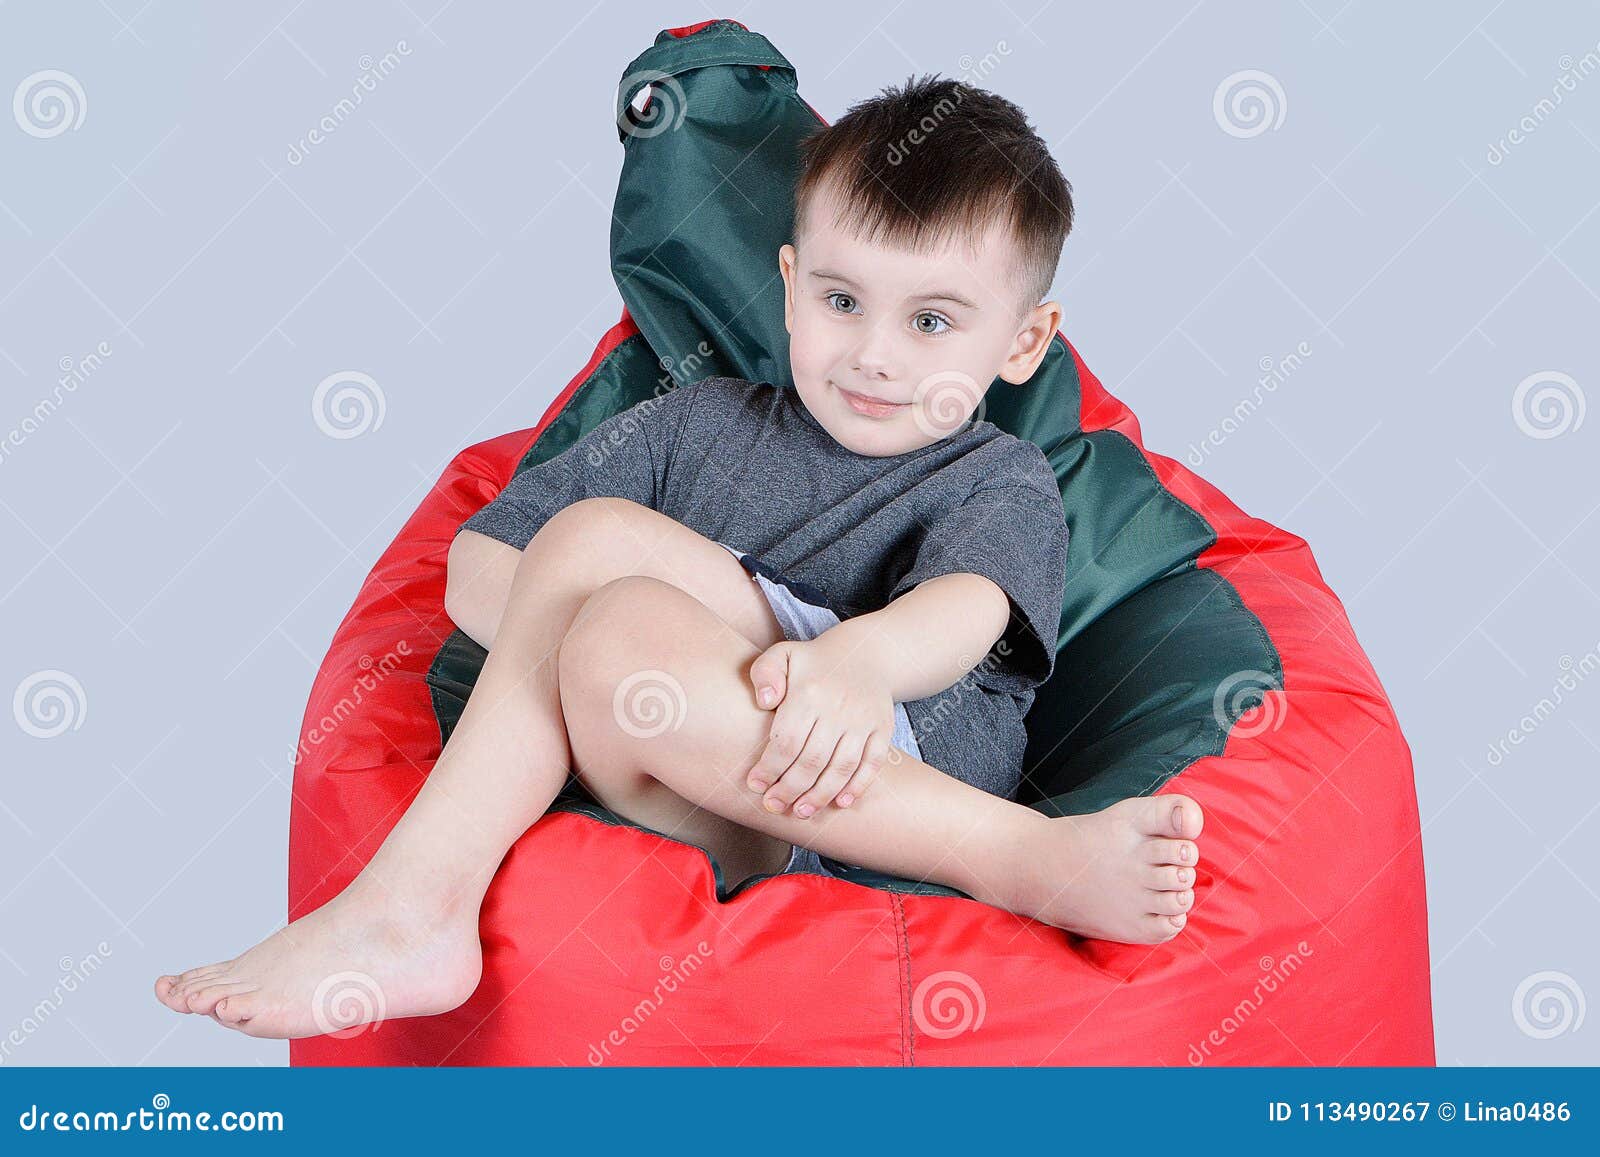 Cute little boy thoughtful stock image. Image of children - 113490267